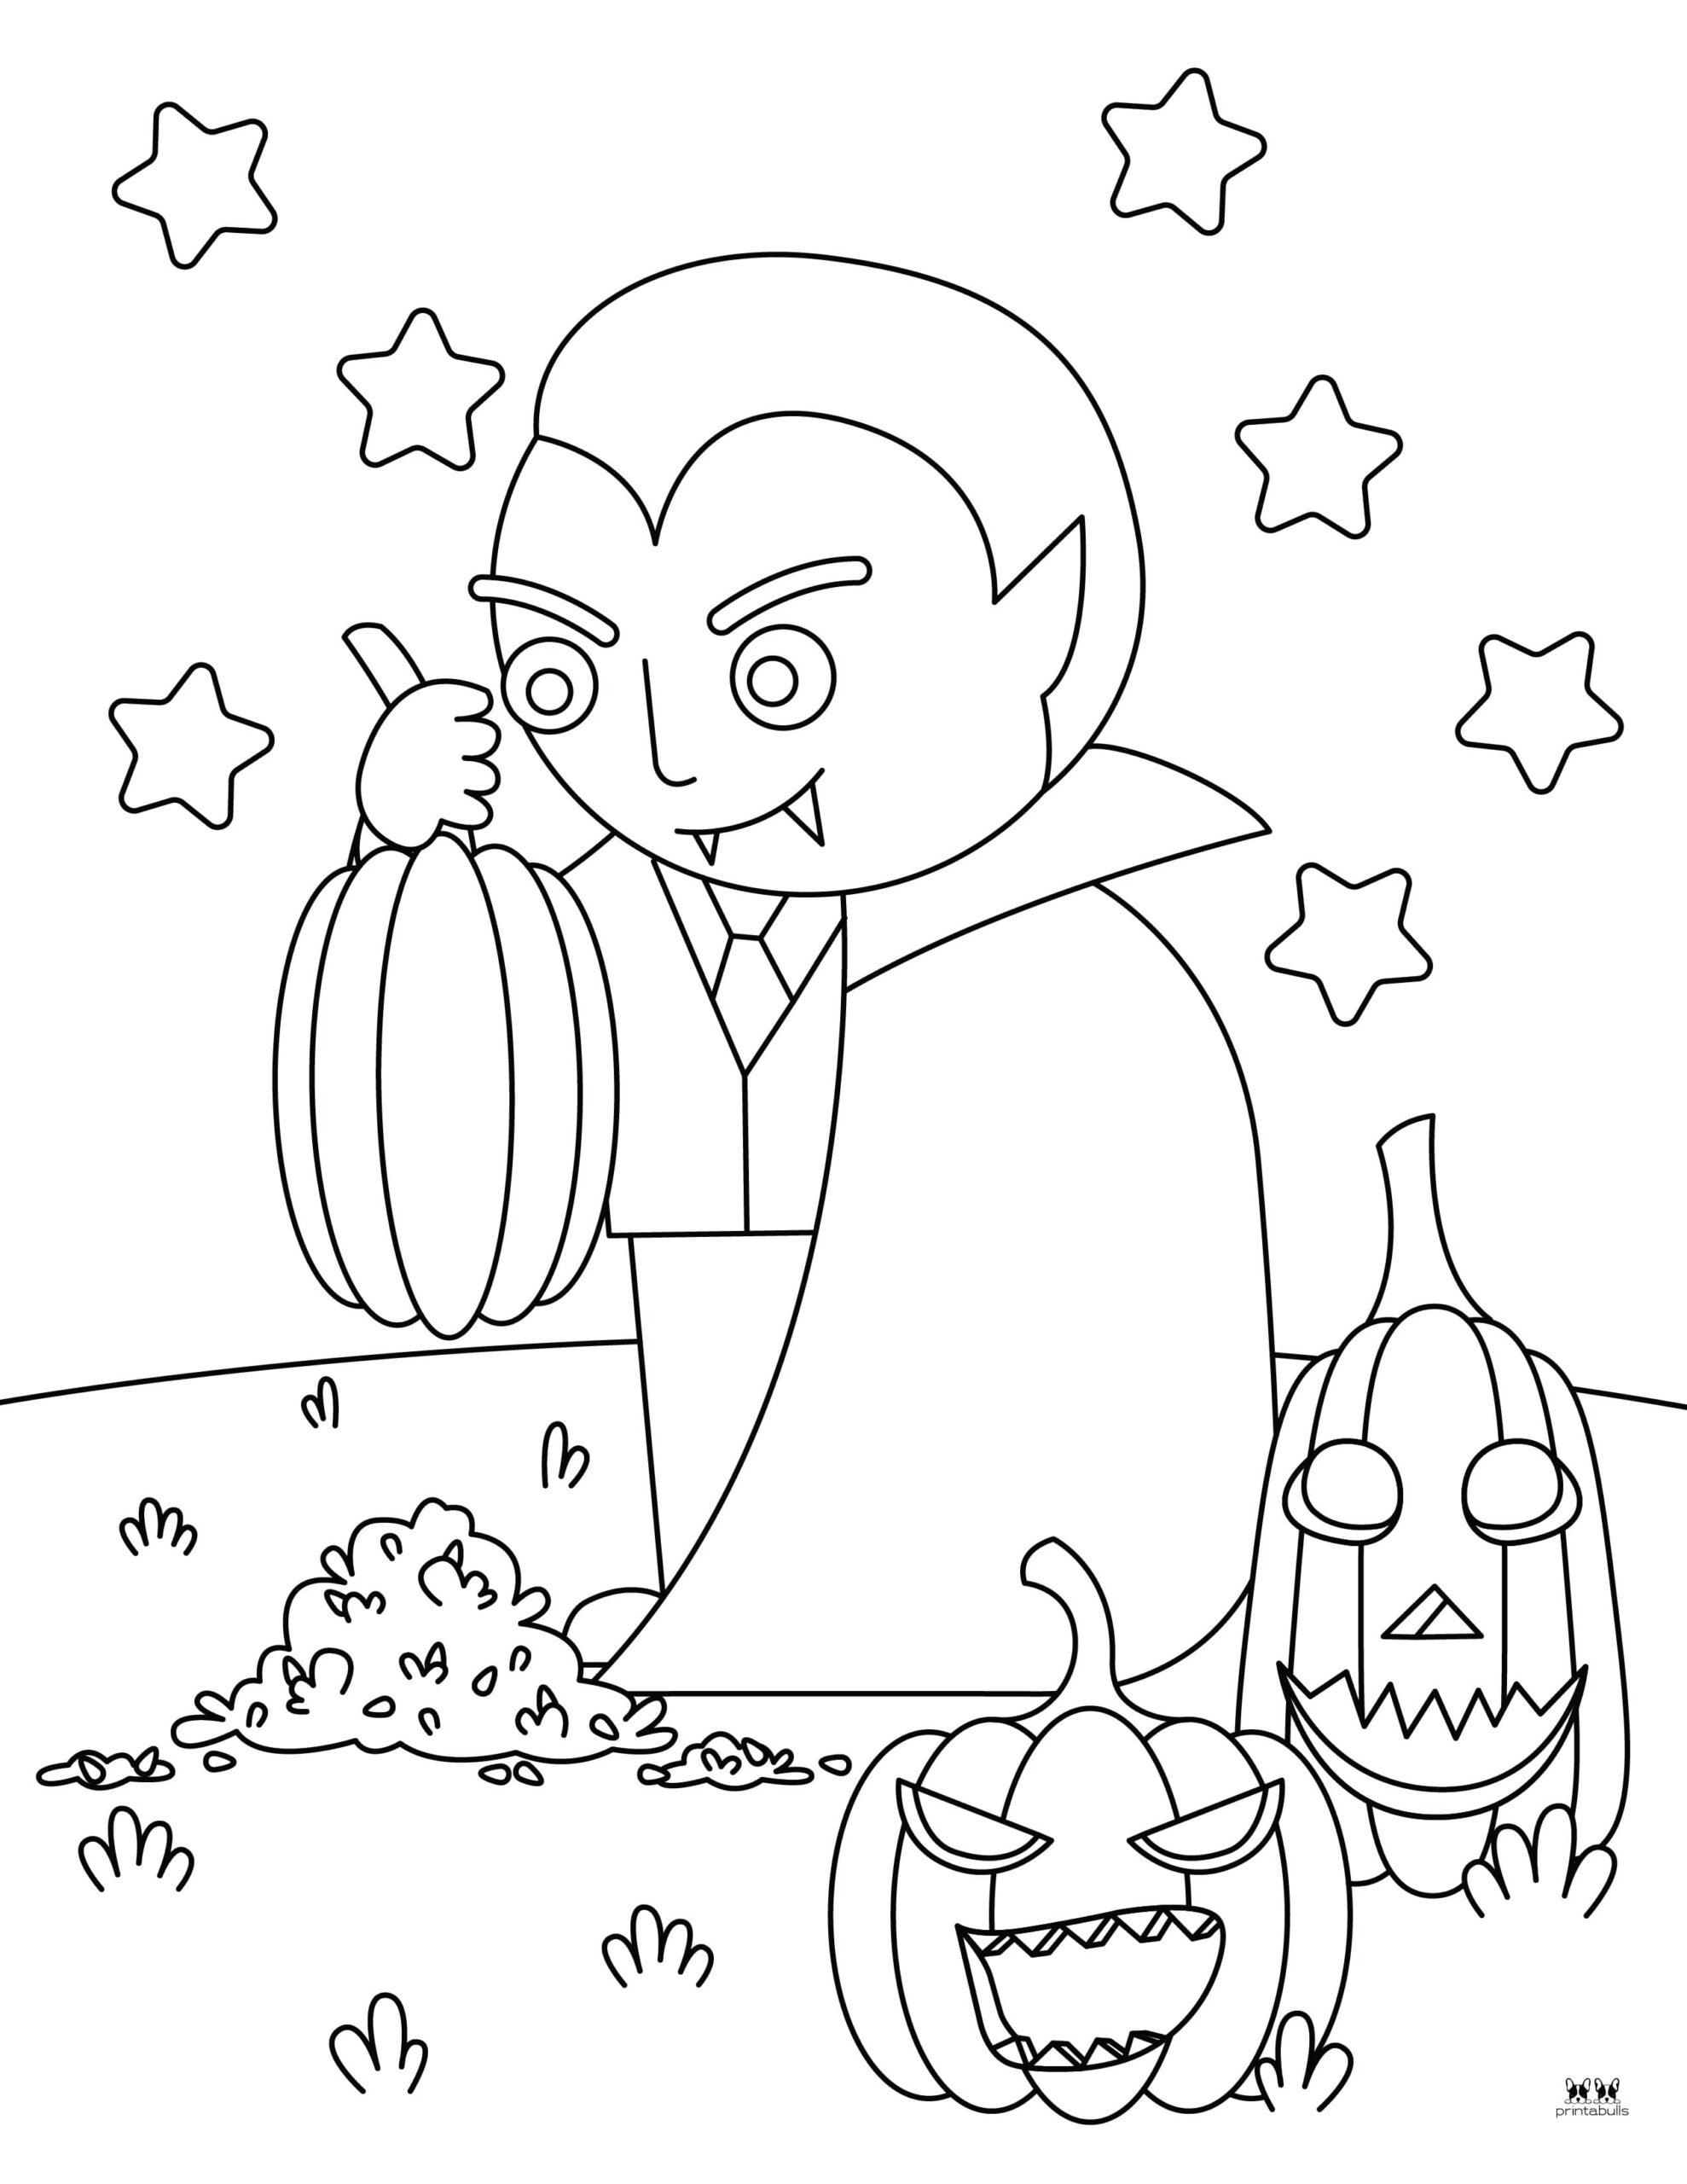 Vampire Coloring Pages & Outlines - 26 FREE Pages | Printabulls